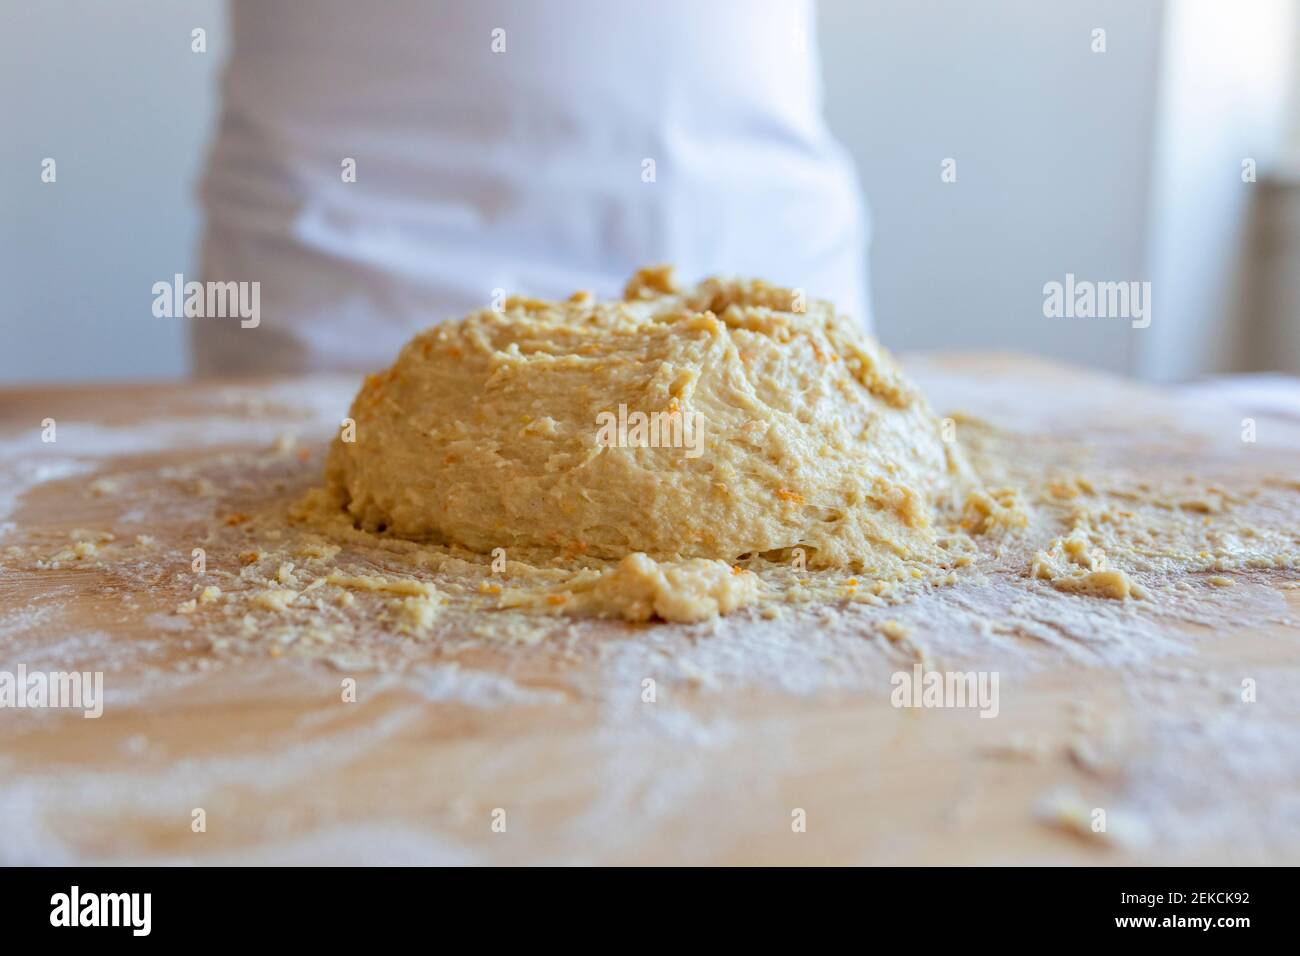 Croissant dough on cutting board in kitchen Stock Photo